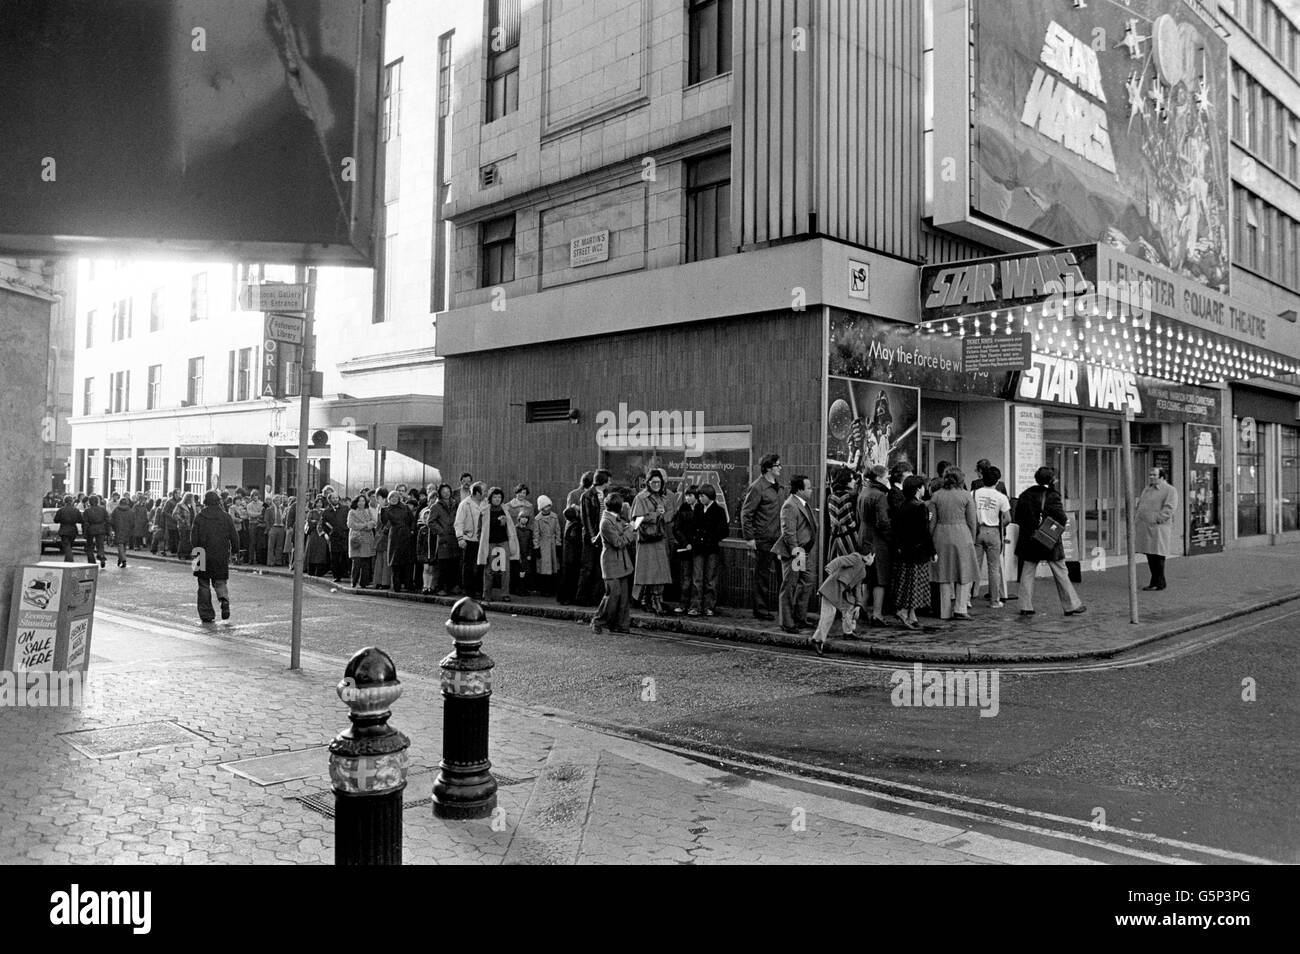 Star Wars - Leicester Square Theatre - Londres - 1977 Banque D'Images